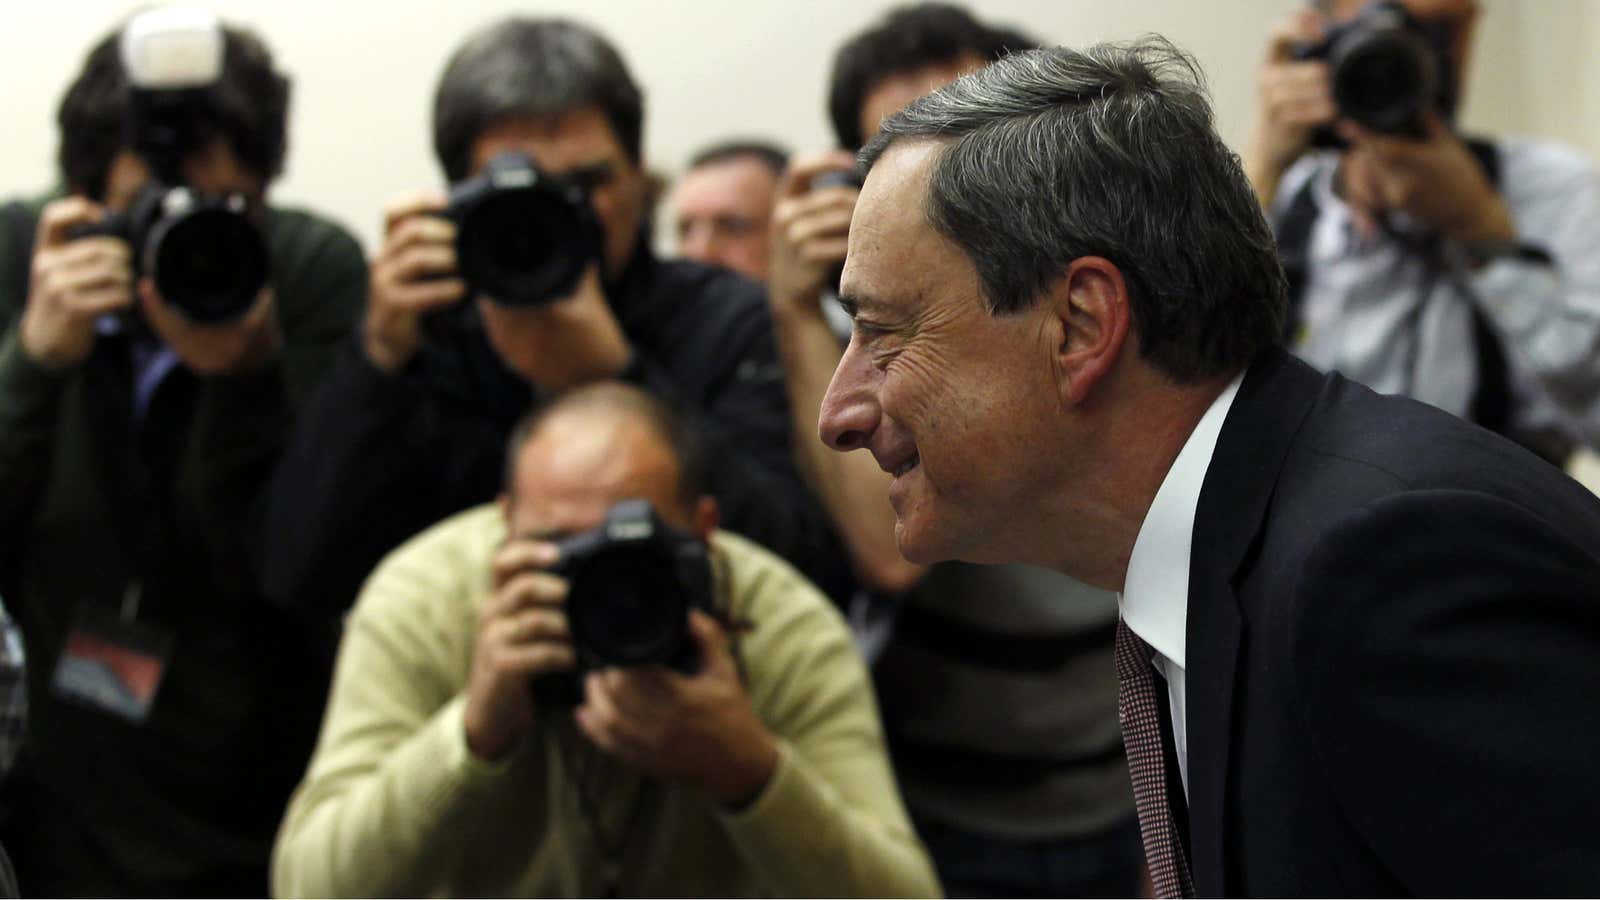 Everyone is watching to see whether Mario Draghi will reopen the monetary taps.